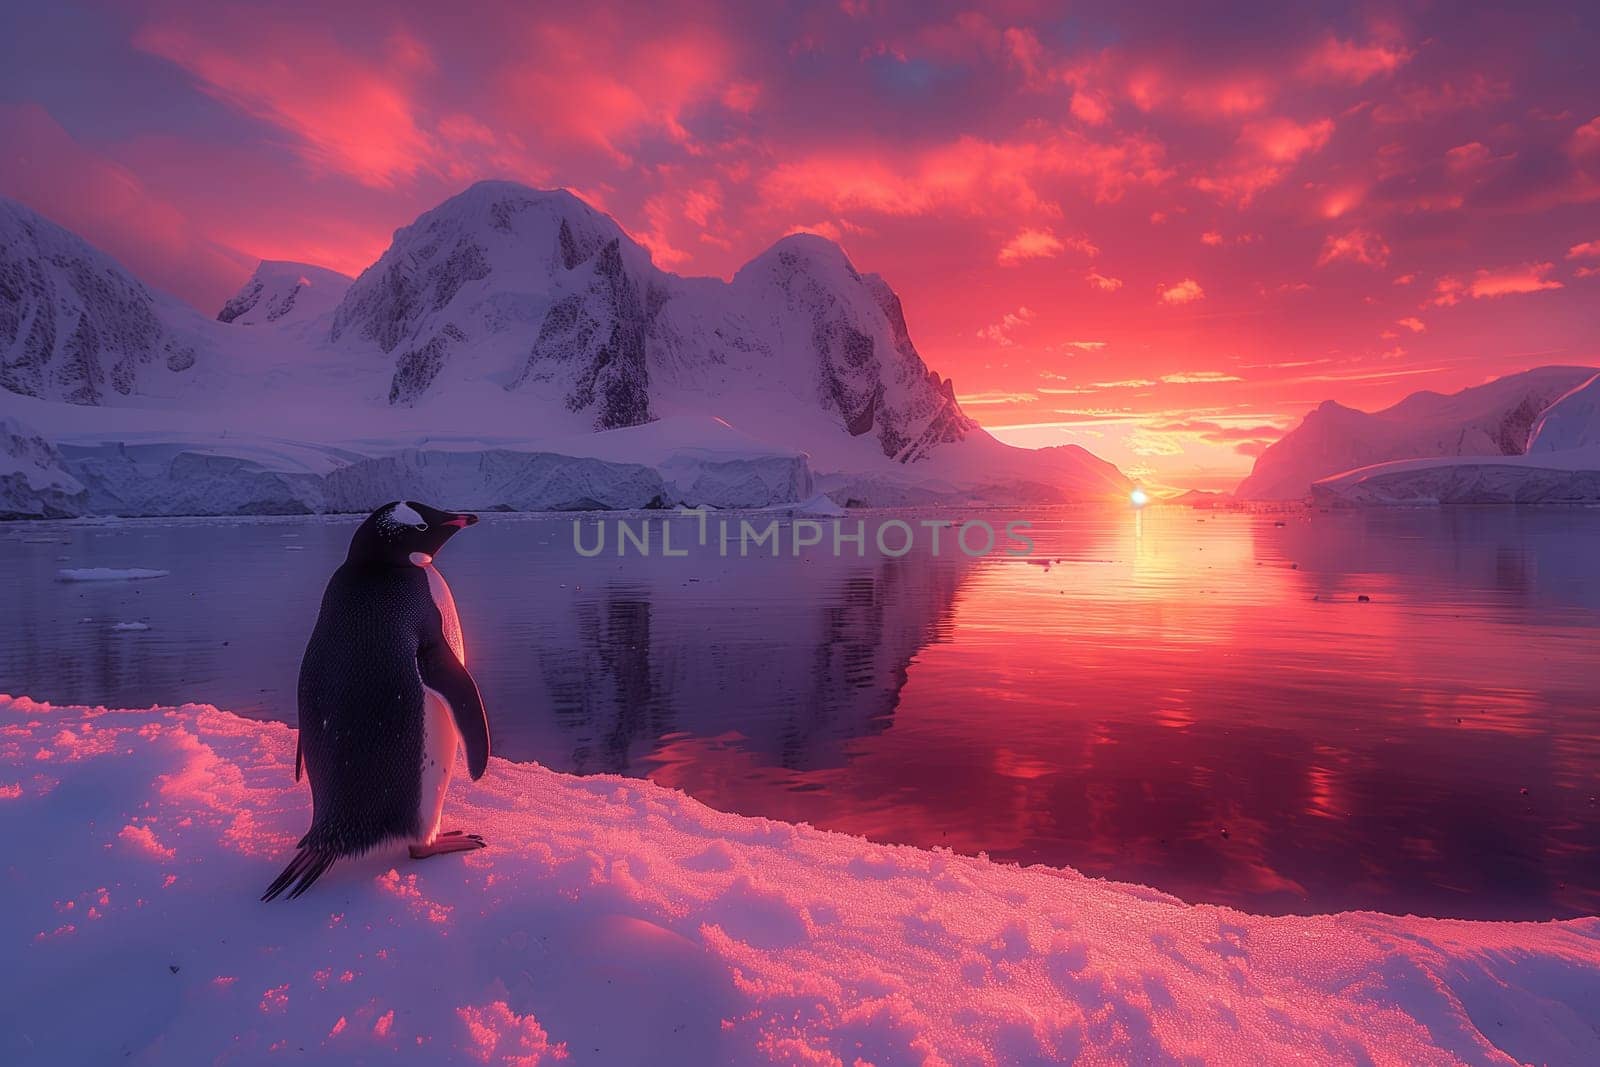 A penguin is admiring the colorful sunset while standing at the shore of a lake, surrounded by a beautiful natural landscape with snowcovered mountains in the background